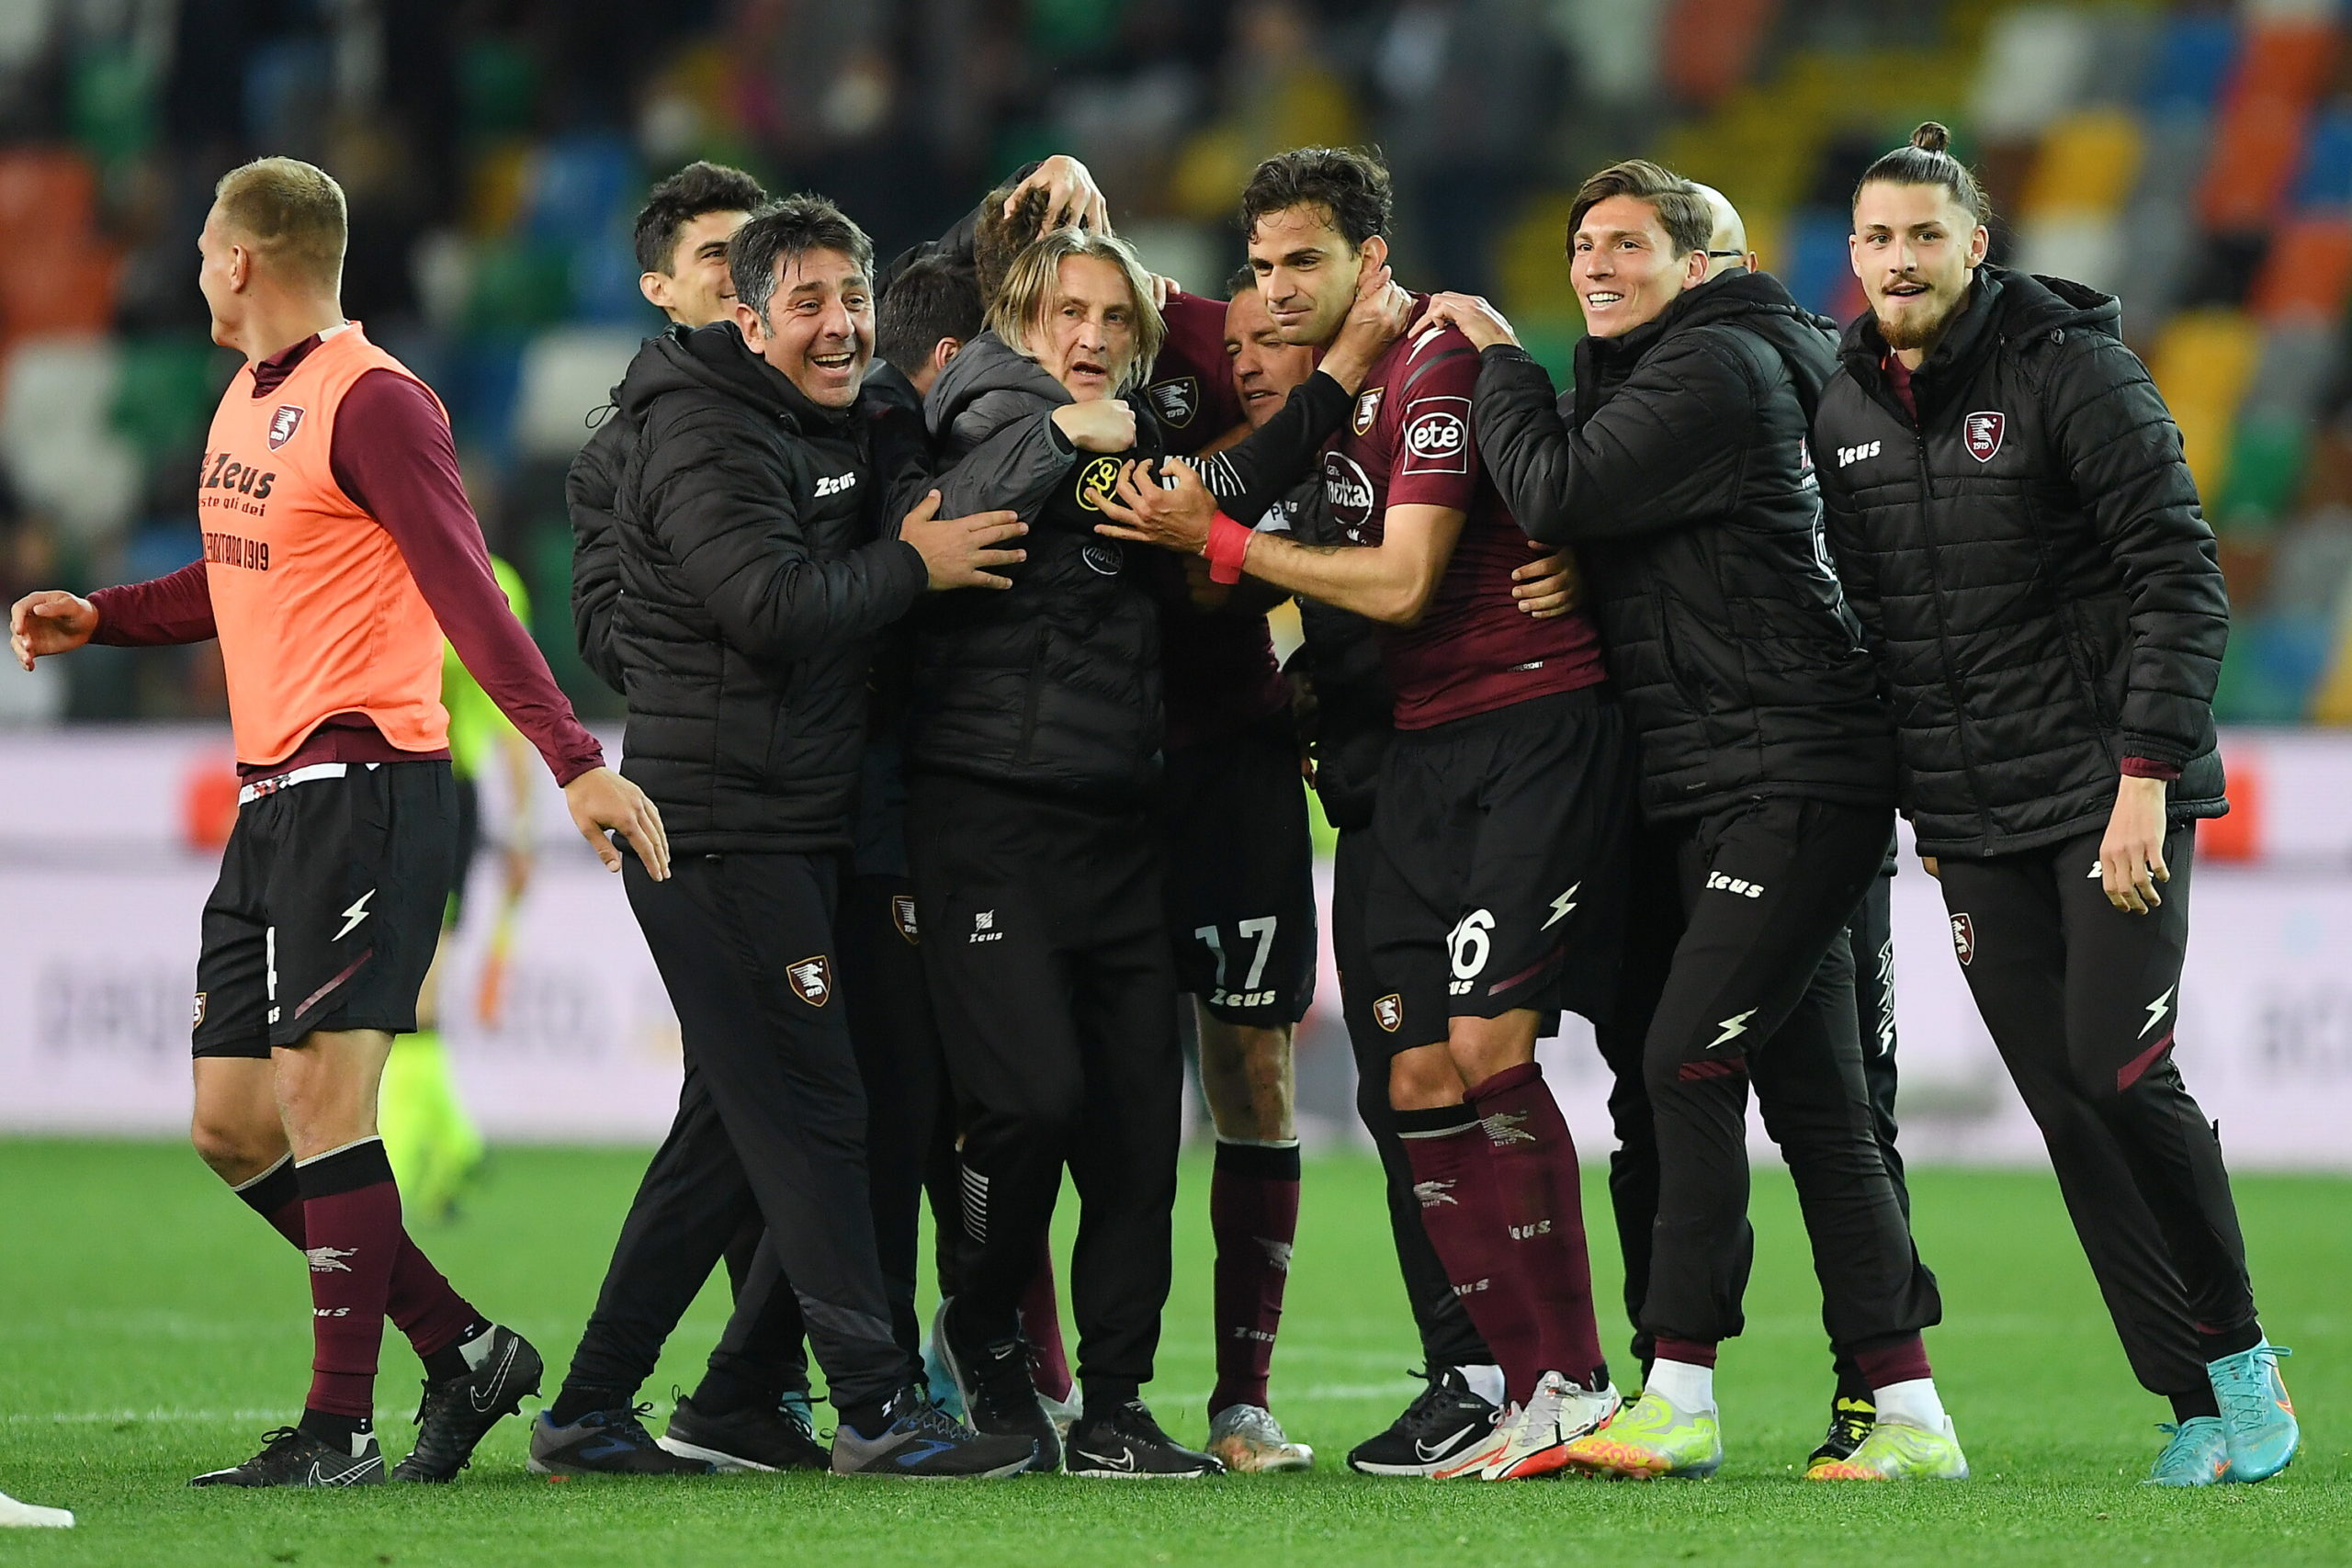 The last act of this season's Serie A had an incredible outcome as Salernitana maintained their top-flight status despite being hammered 0-4 by Udinese